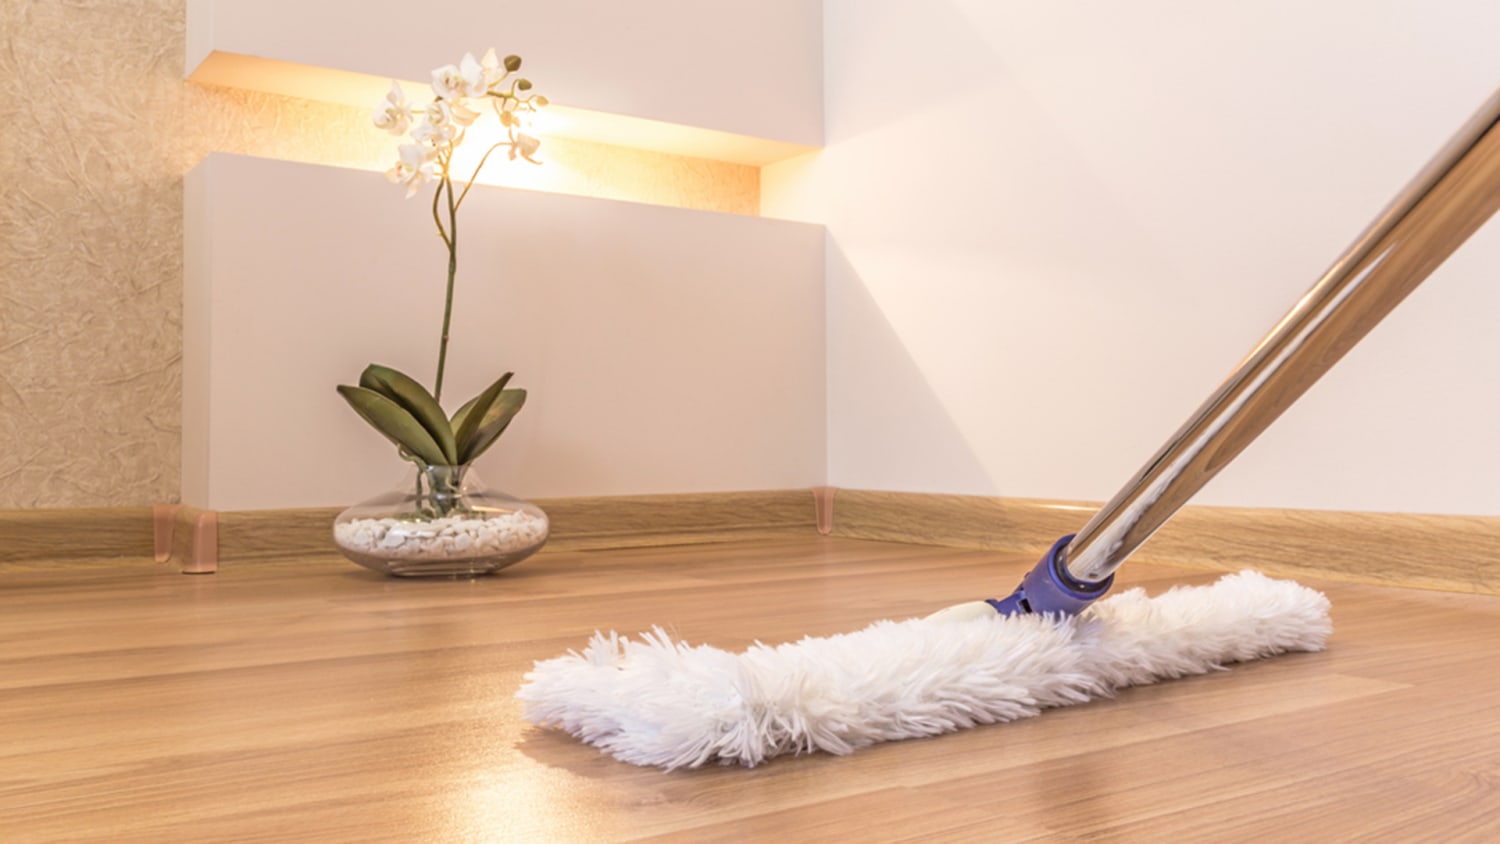 How To Clean Hardwood Floors The Right Way, Cleaning Prefinished Hardwood Floors With Vinegar